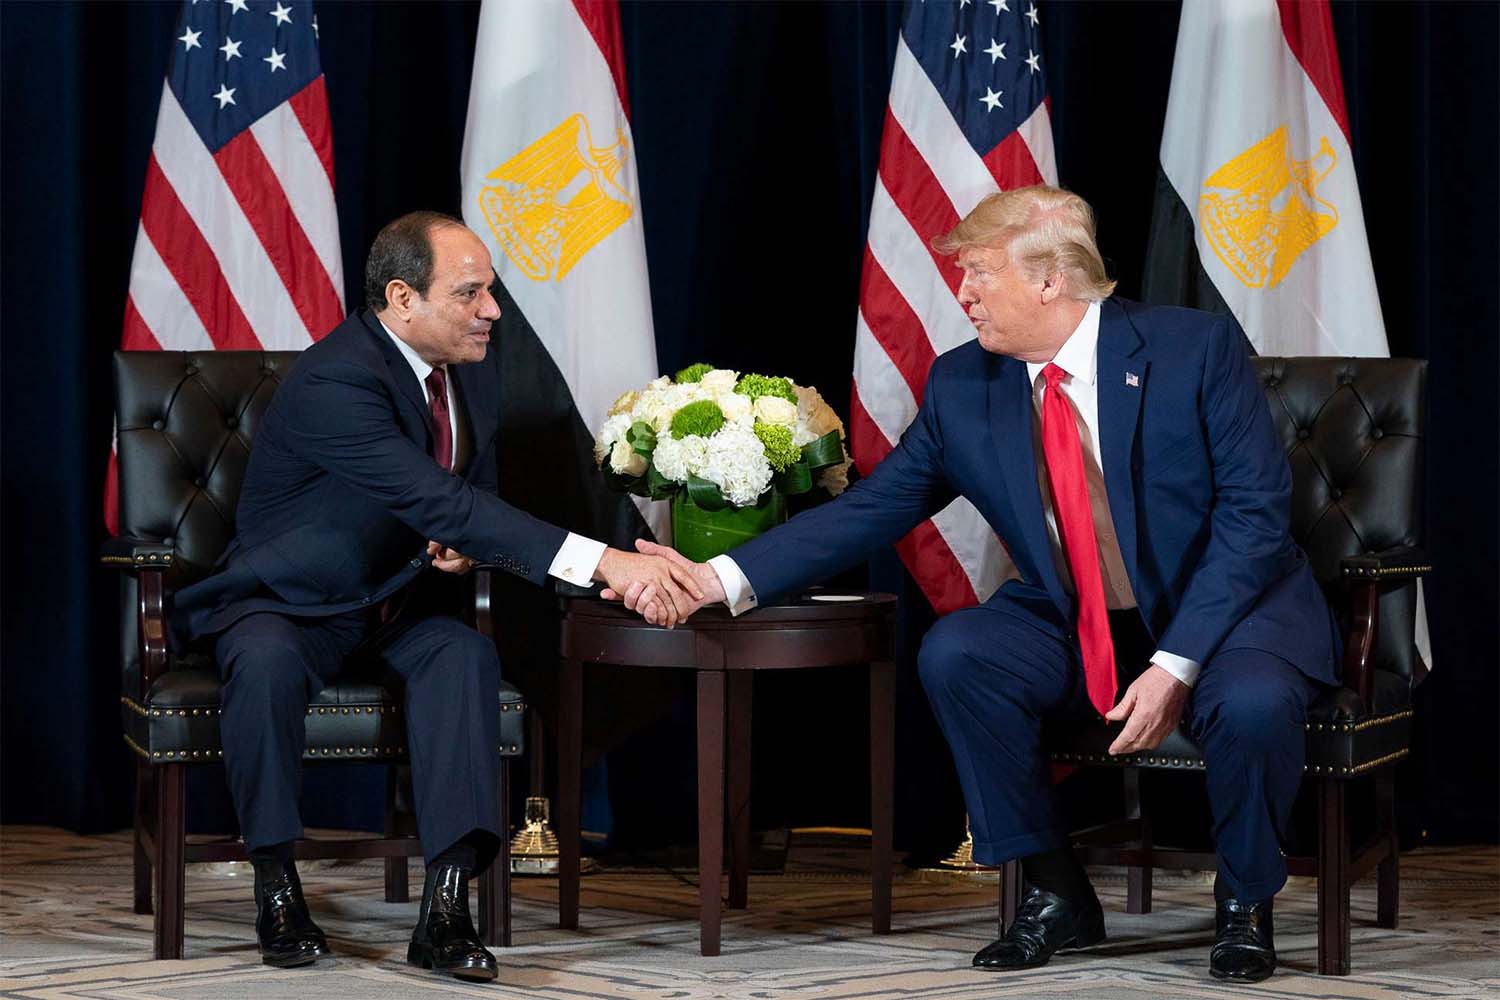 US President Donald Trump shakes hands with Egyptian President Abdel Fattah el-Sisi during their meeting